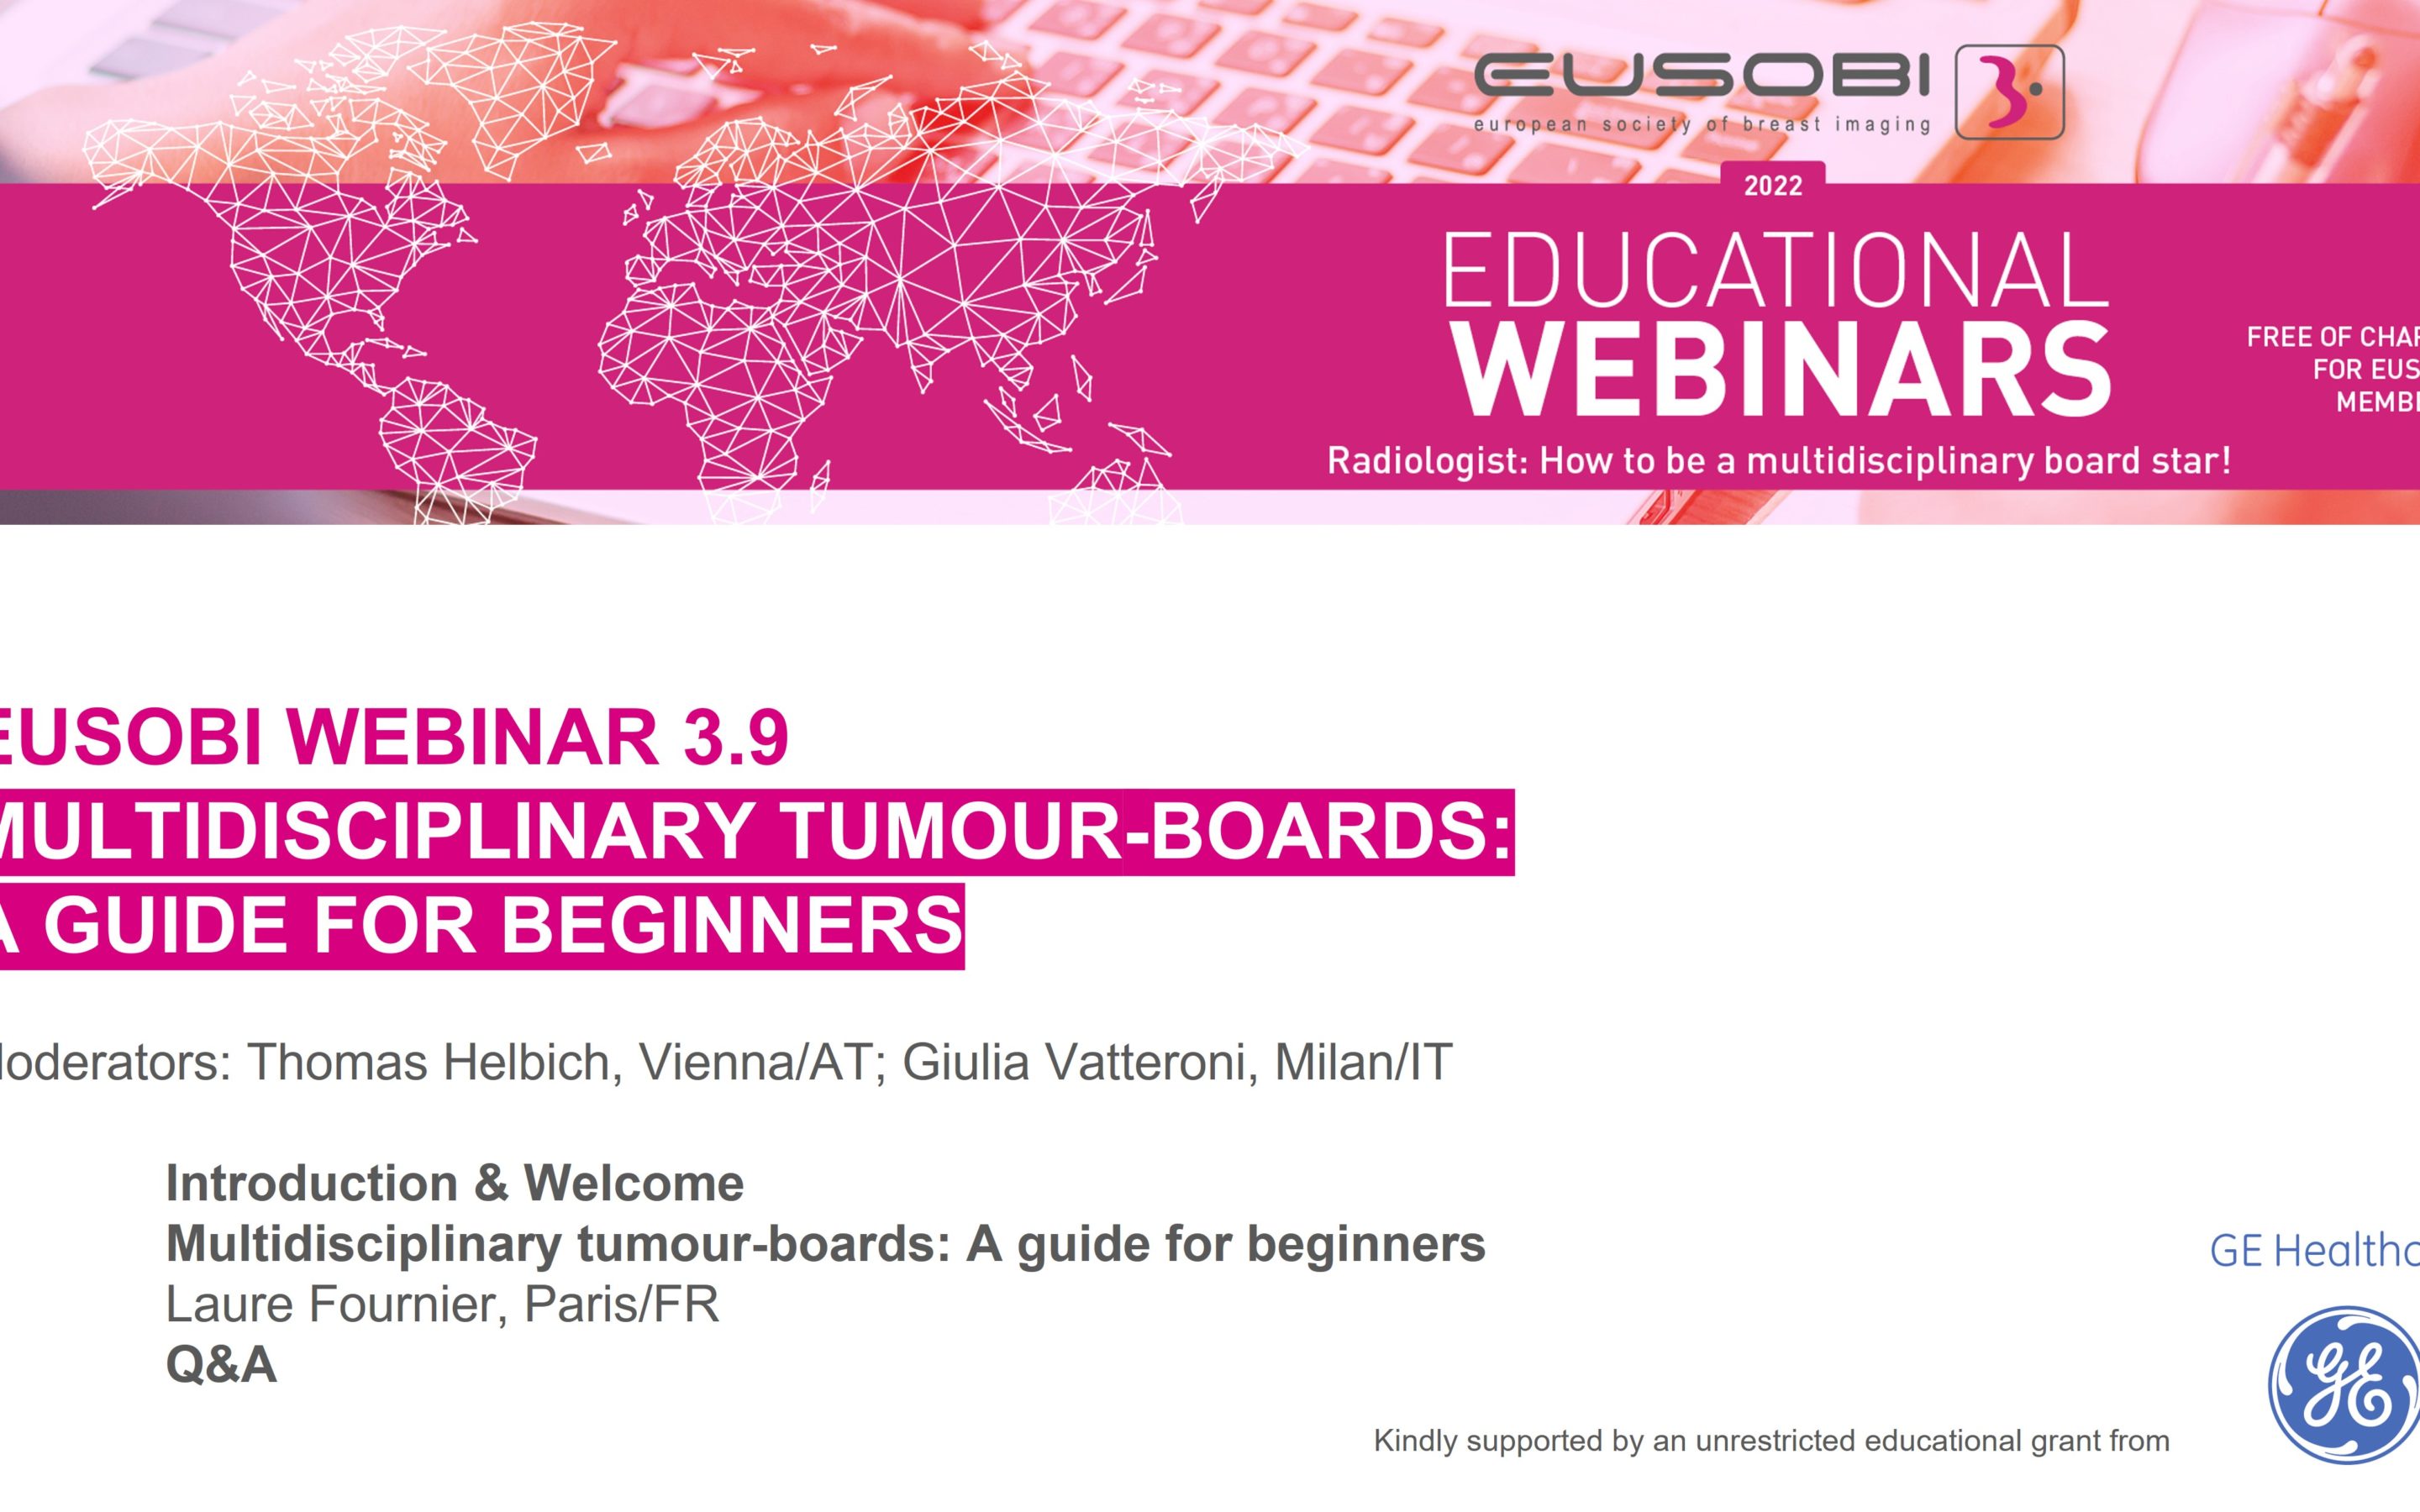 3.9 / Multidisciplinary tumour-boards: a guide for beginners